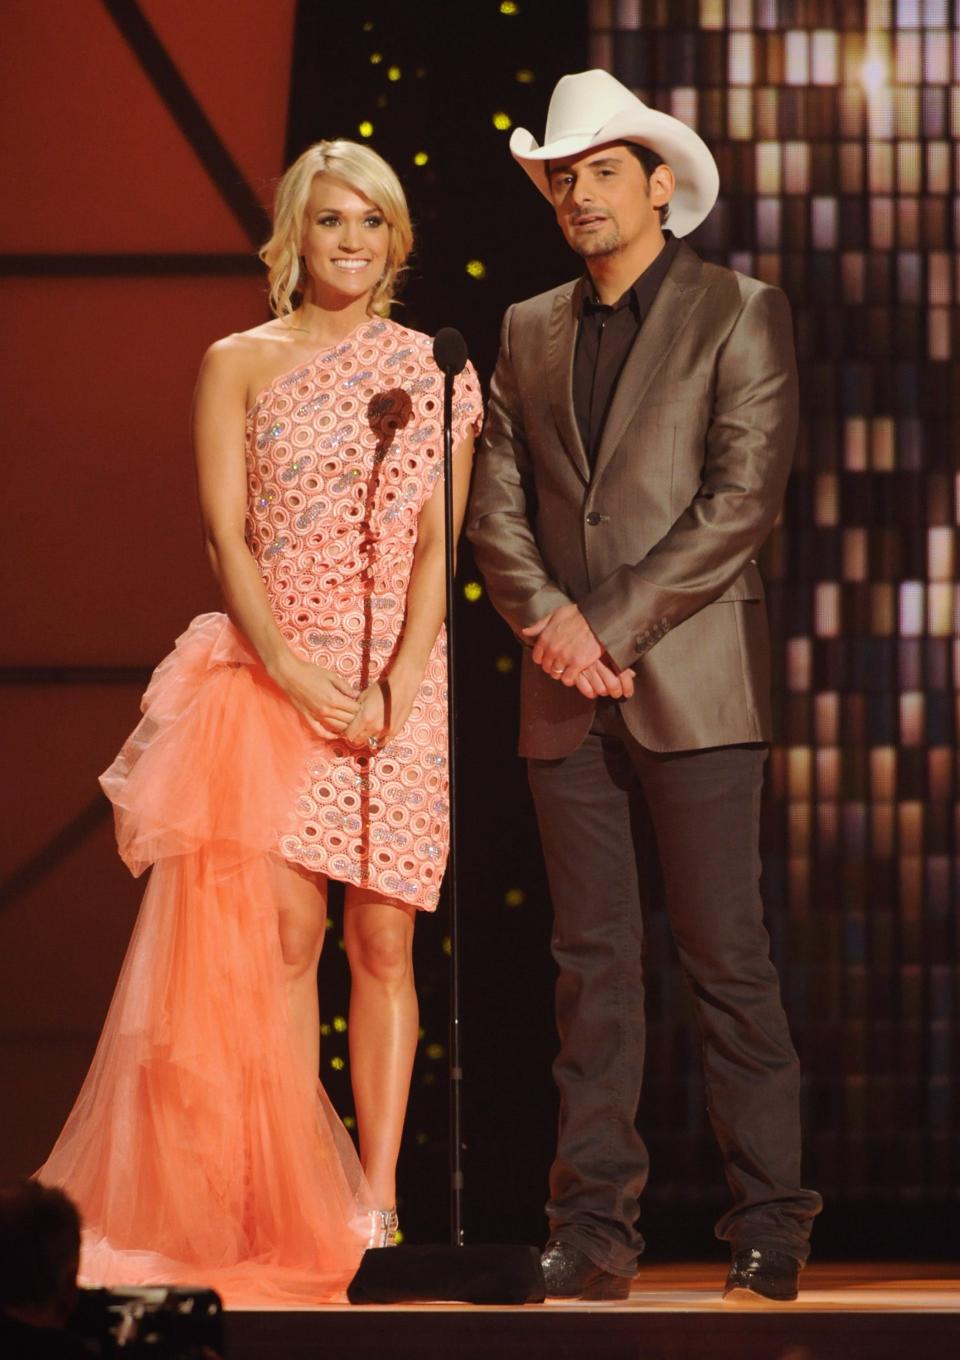 Carrie Underwood and Brad Paisley speak at the 45th annual CMA Awards